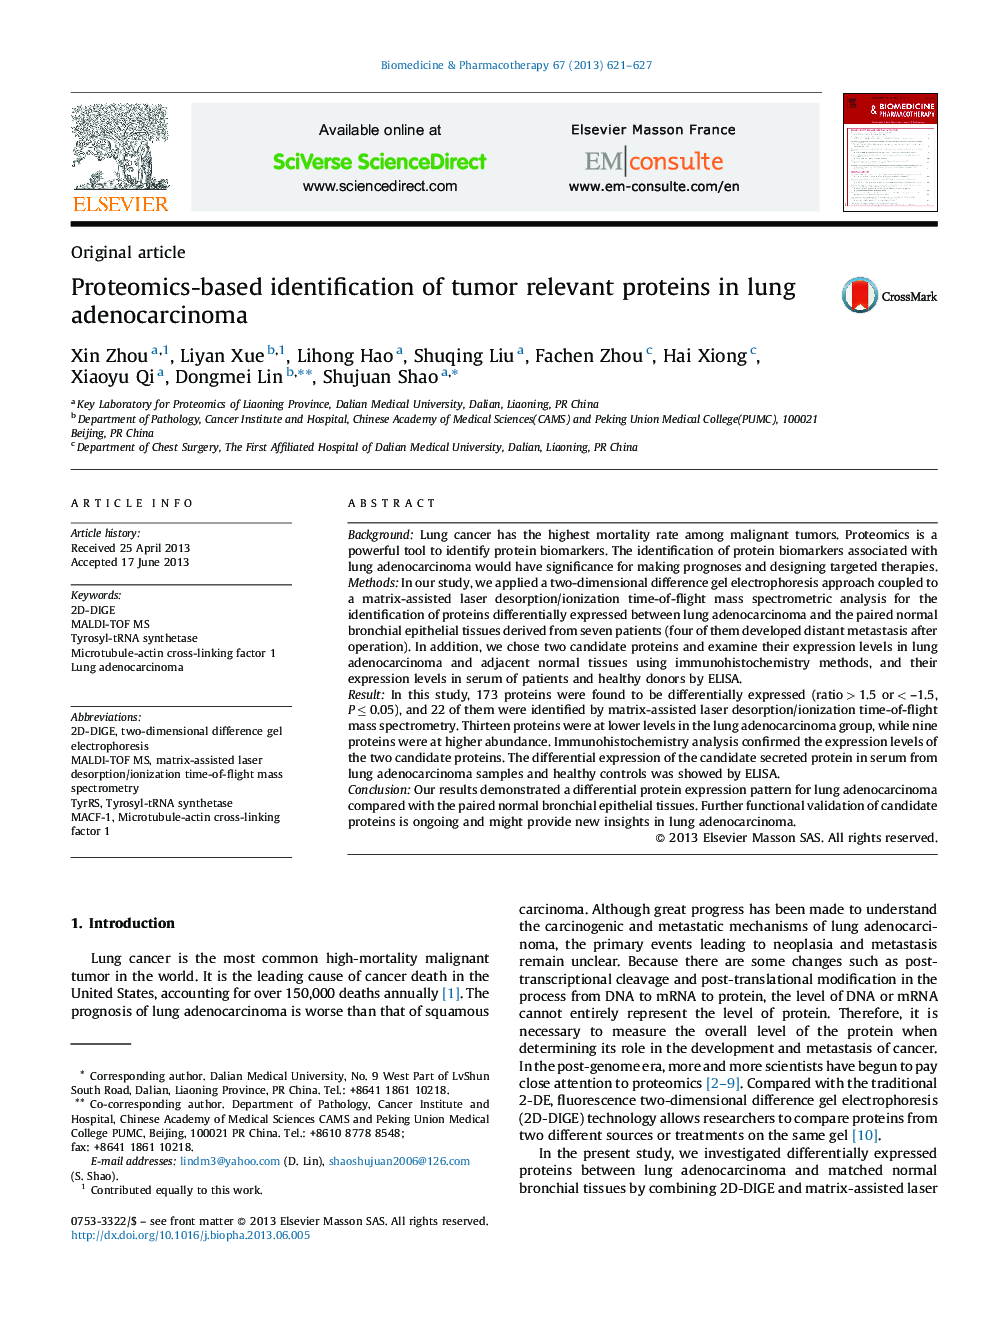 Proteomics-based identification of tumor relevant proteins in lung adenocarcinoma